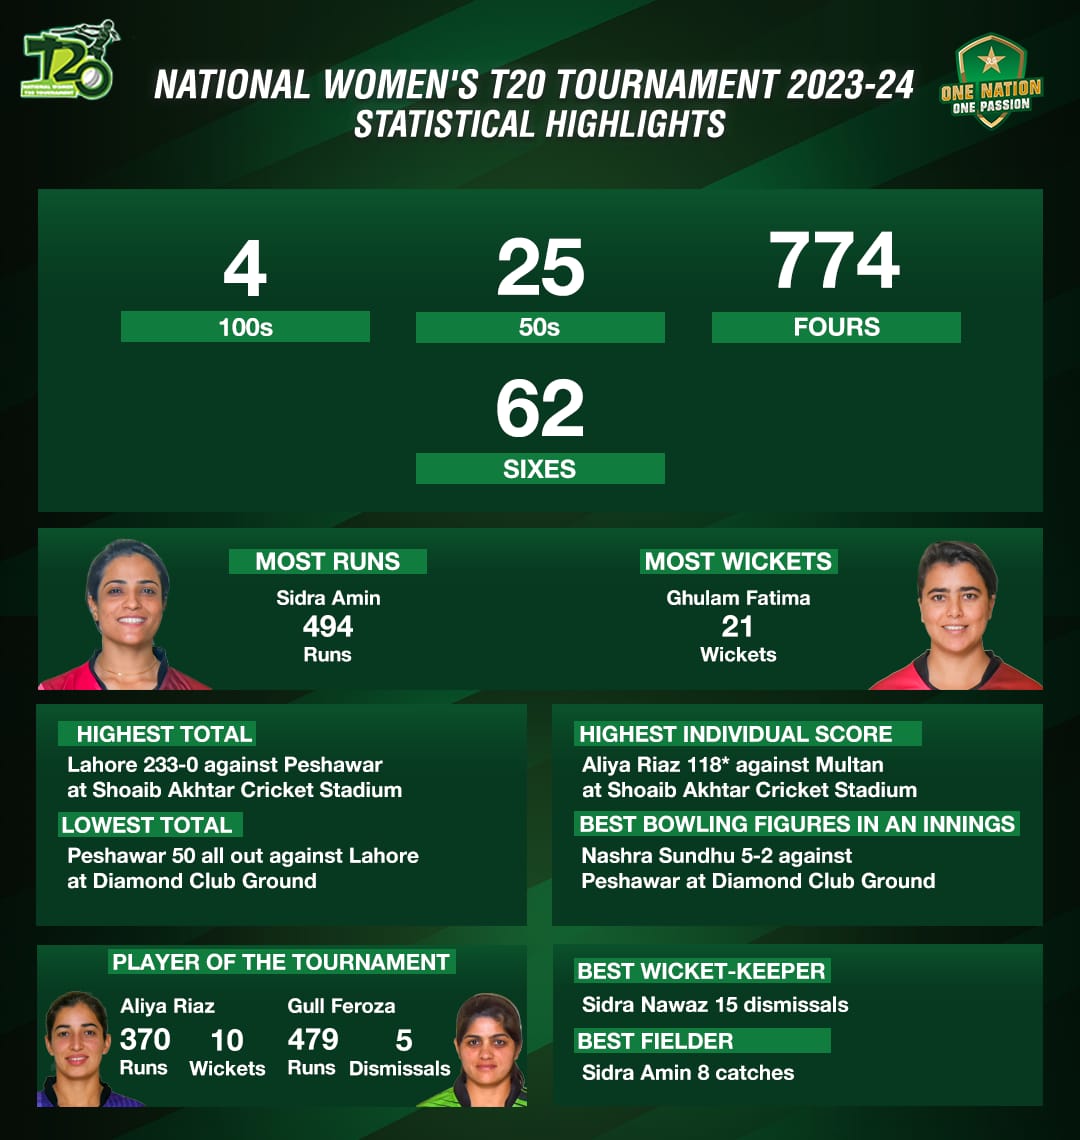 Statistical review of National Women’s T20 Tournament 2023-24